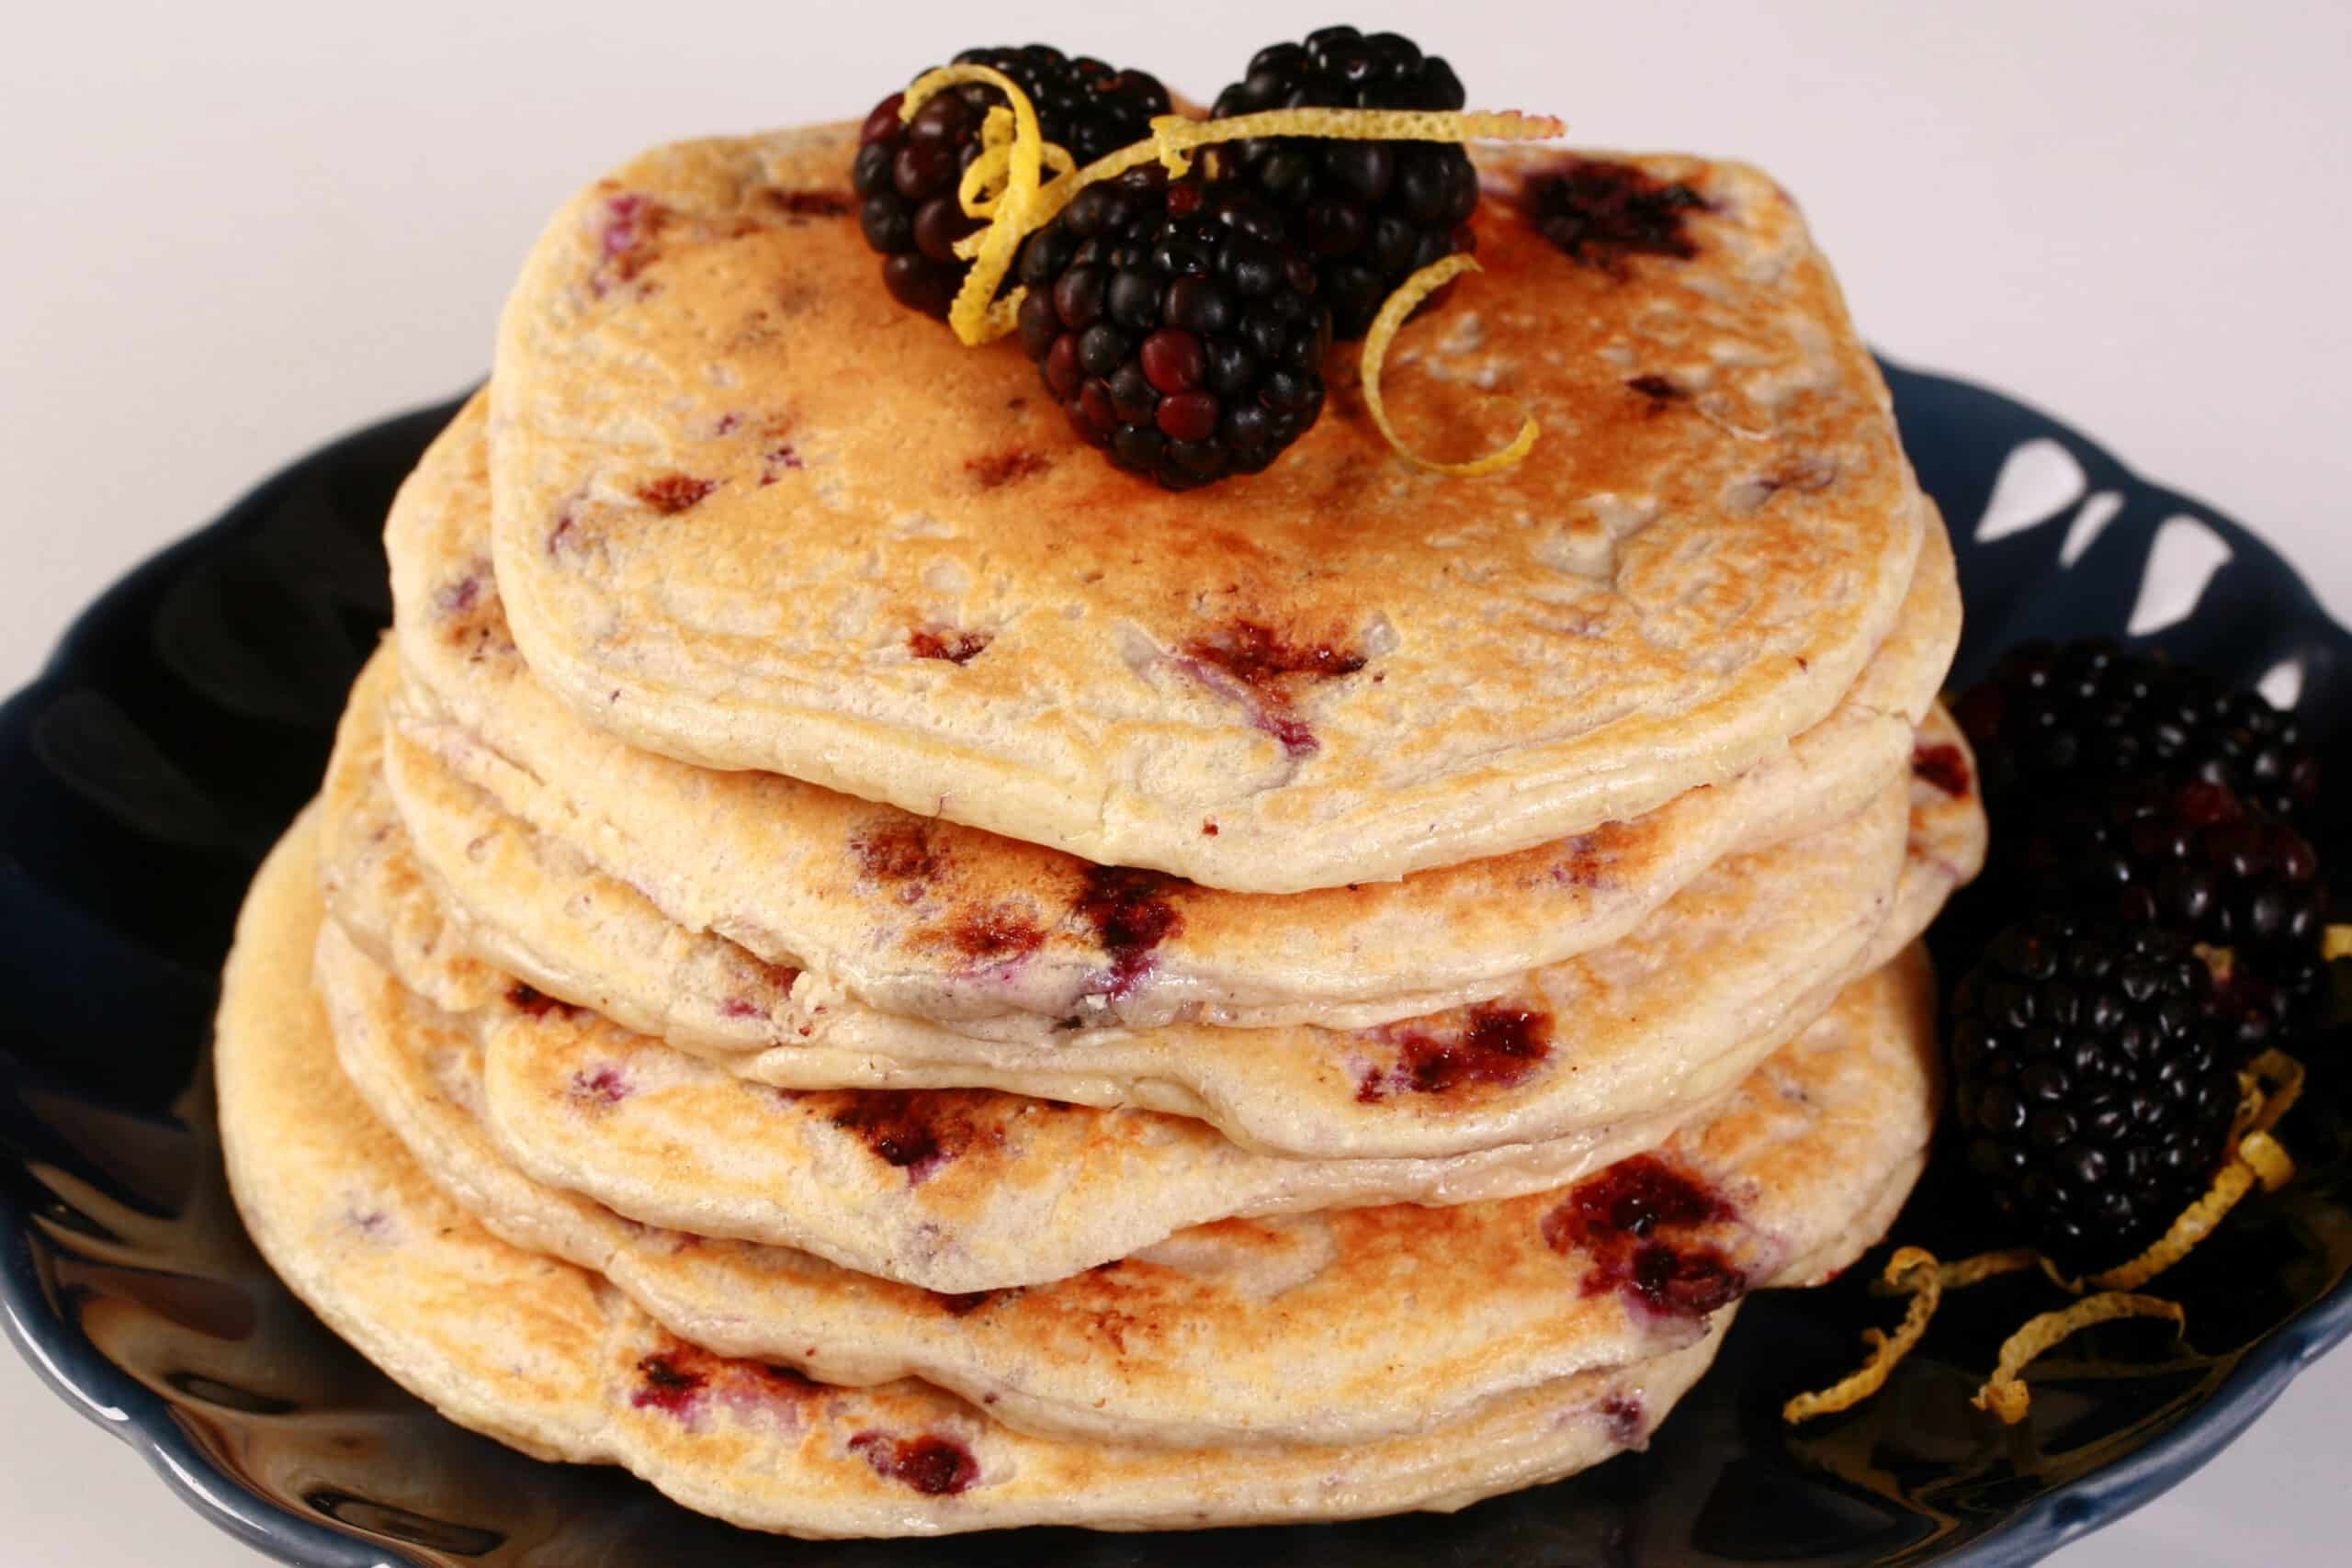 A stack of 6 blackberry protein pancakes with blackberries and lemon curls on top.